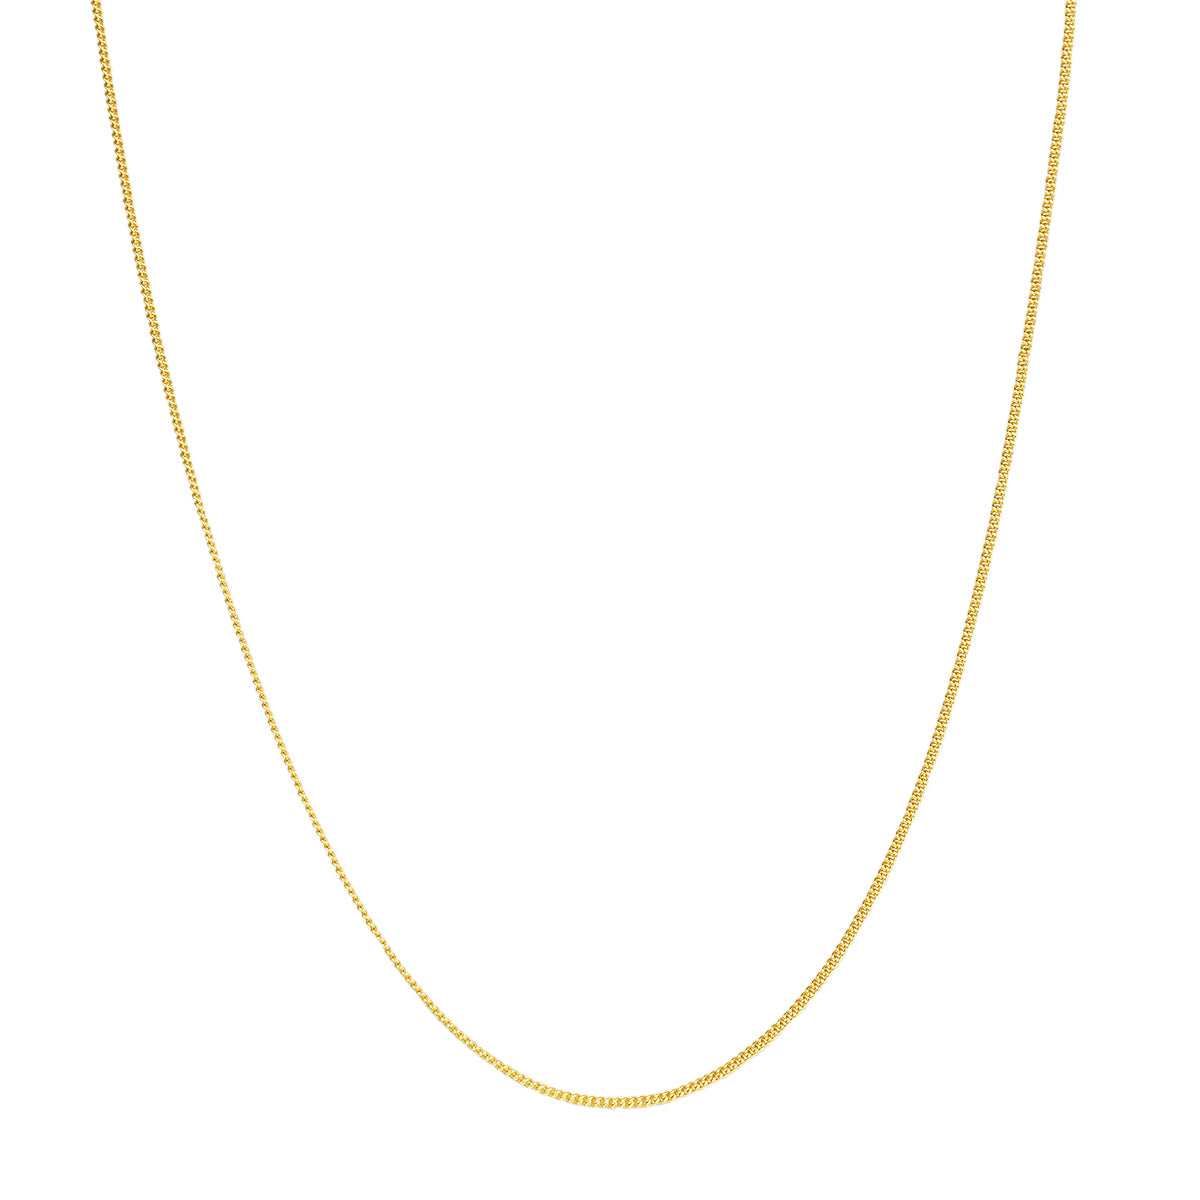 Fine Textured Chain Necklace Sterling Silver